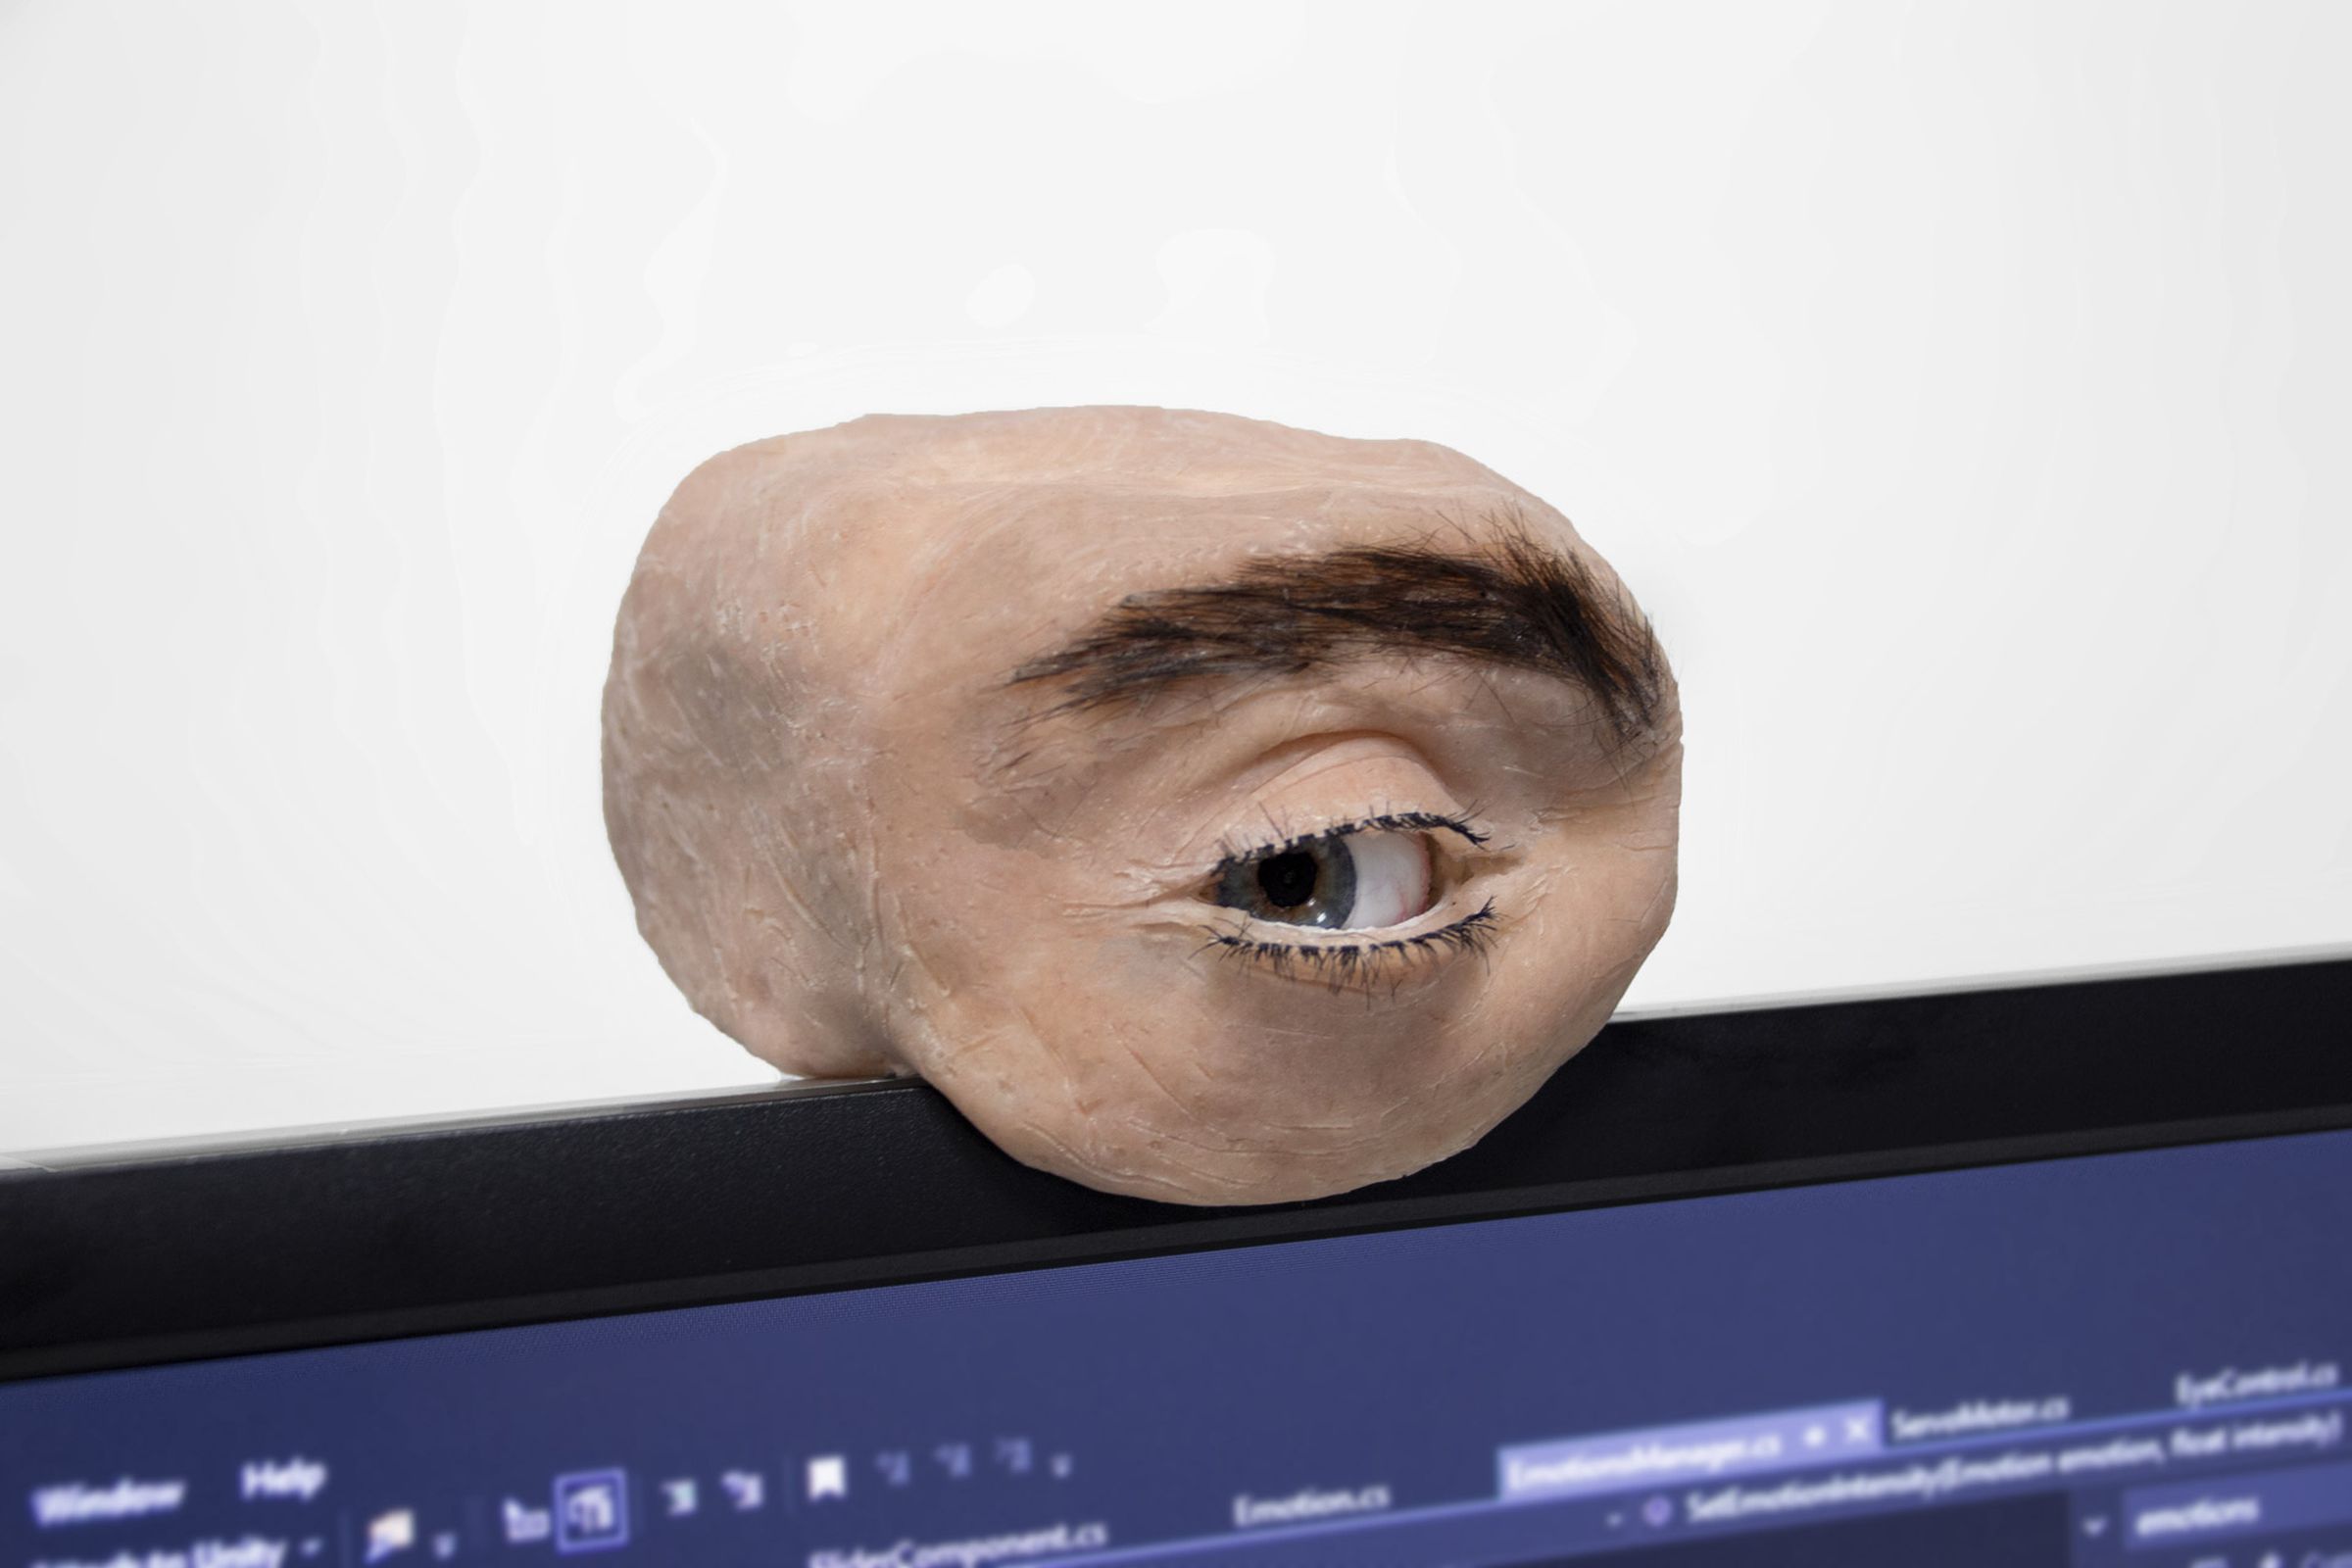 A hunk of synthetic flesh with an eyeball and eyebrow, plopped on top of a screen where a webcam would go. The eye is looking to the left.